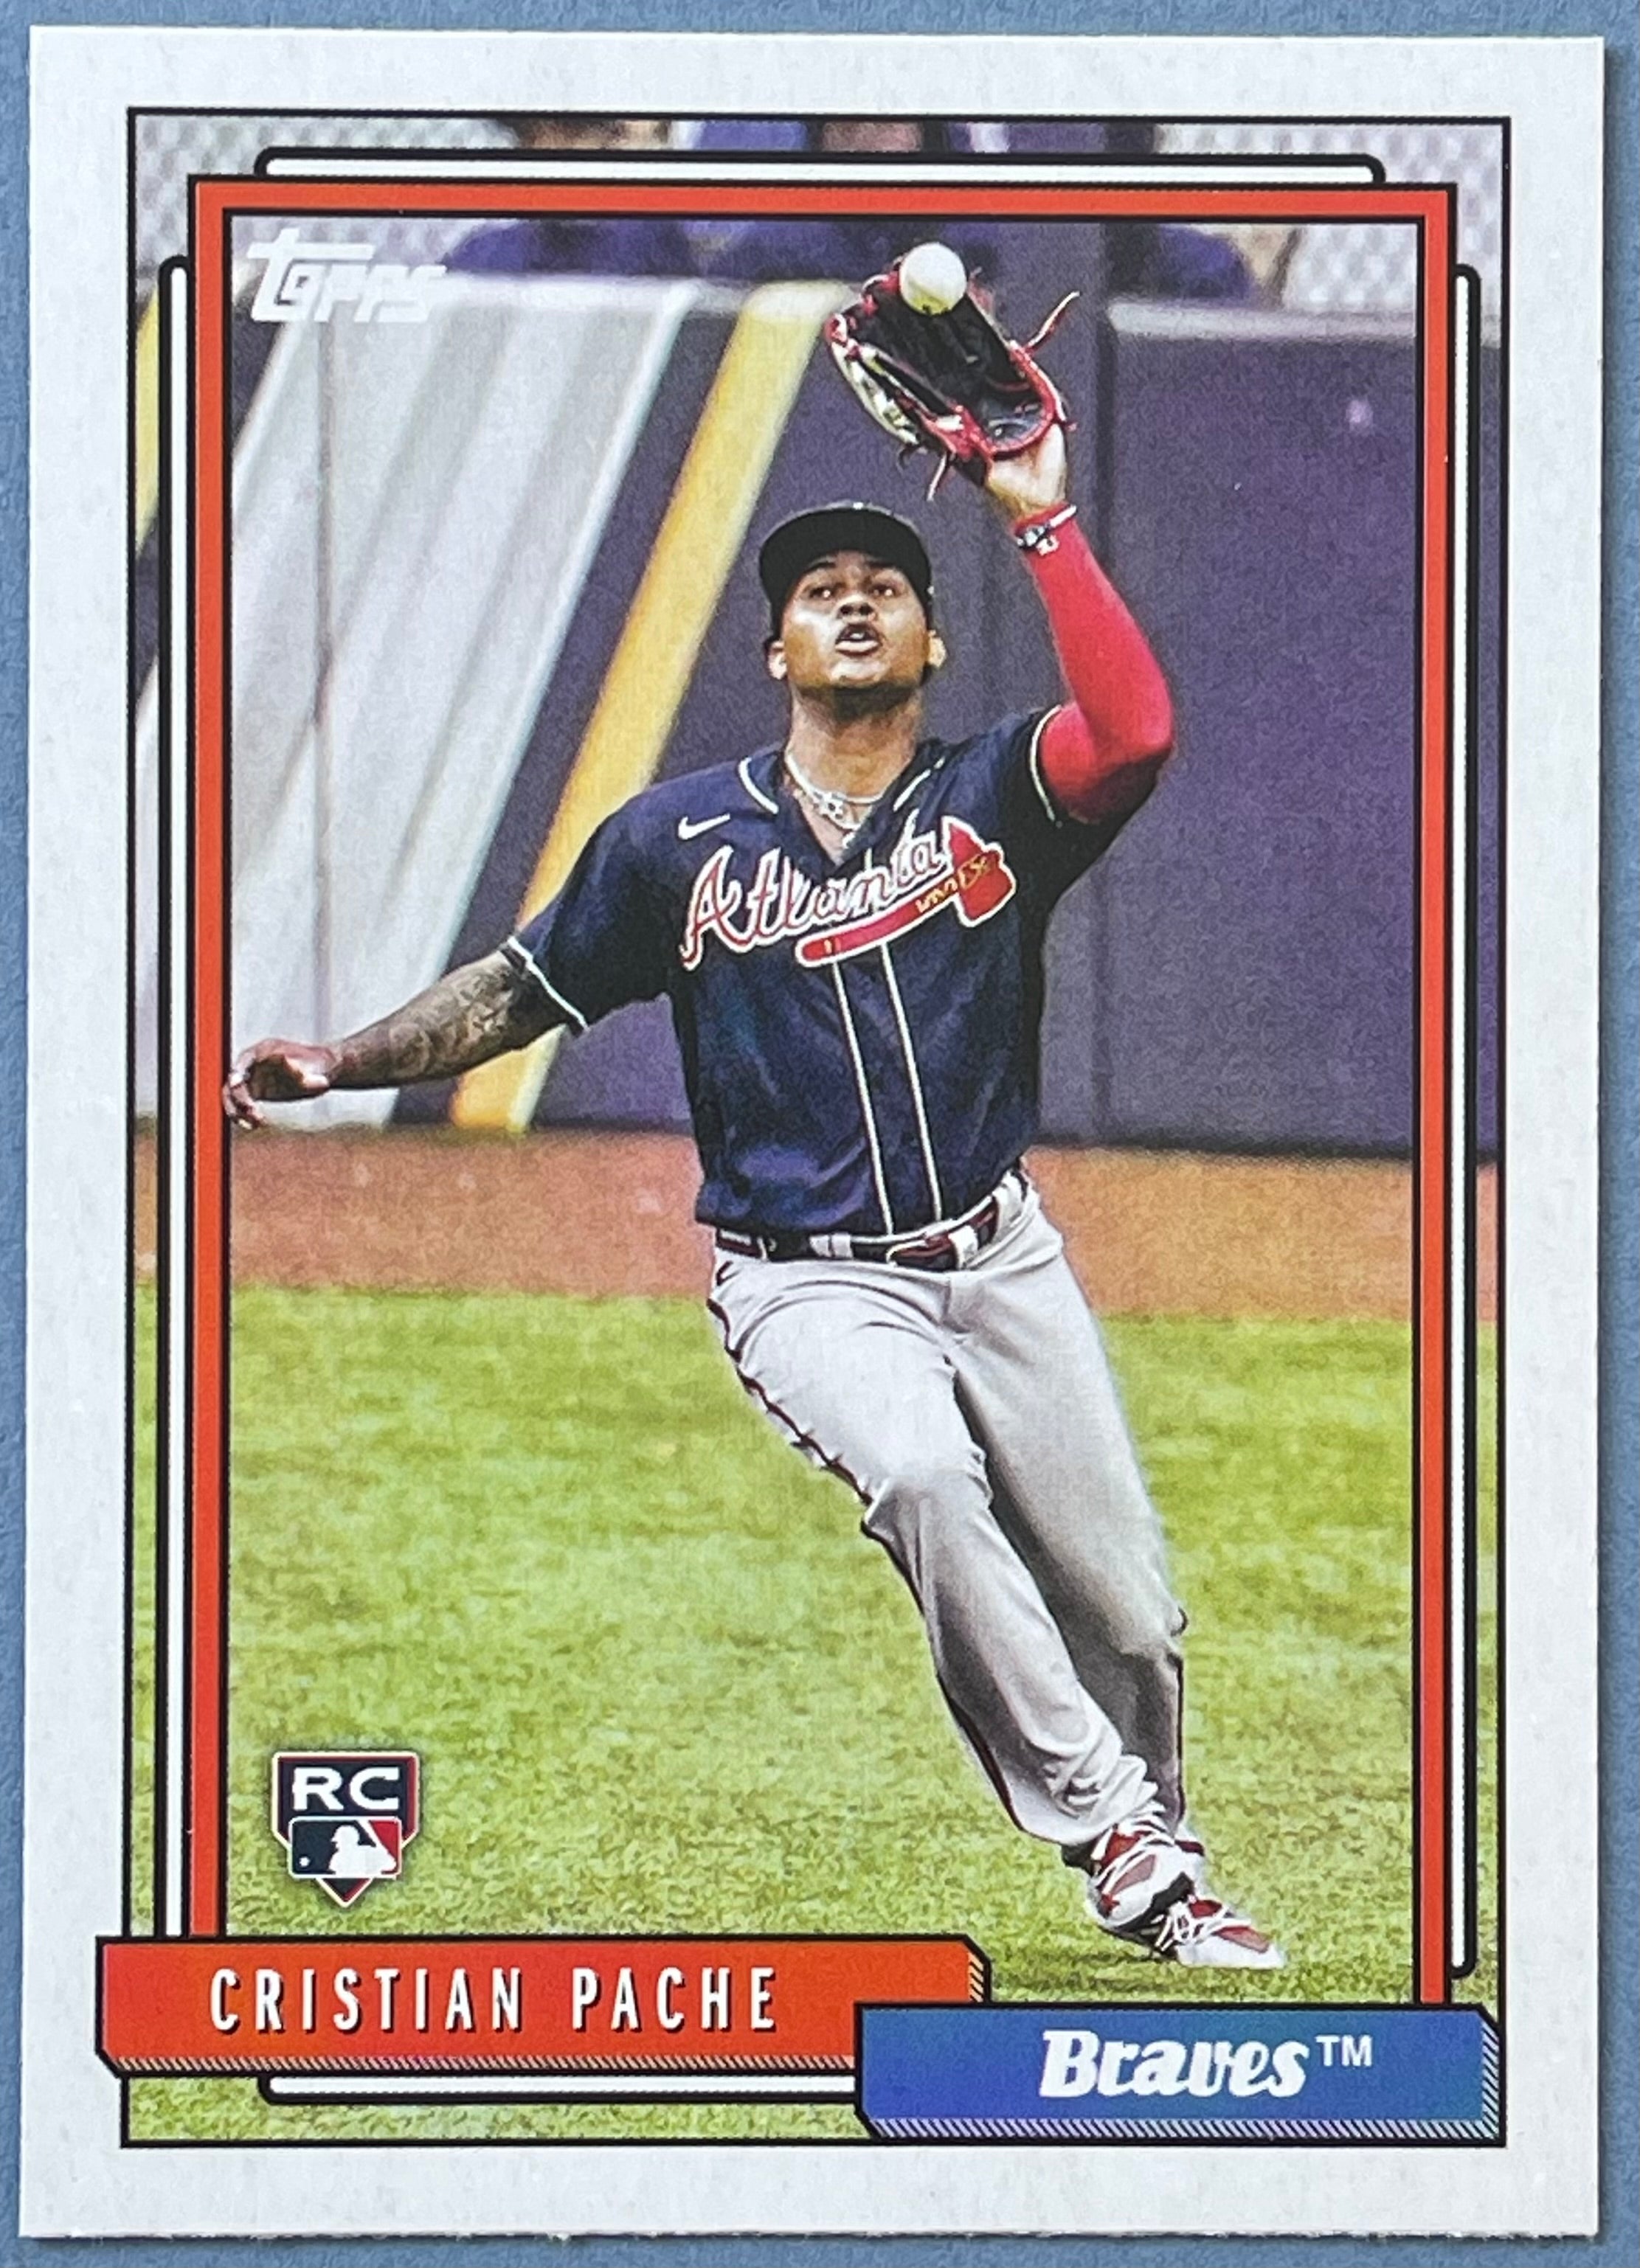 2021 Topps Cristian Pache Major League Material rookie jersey patch card  Braves